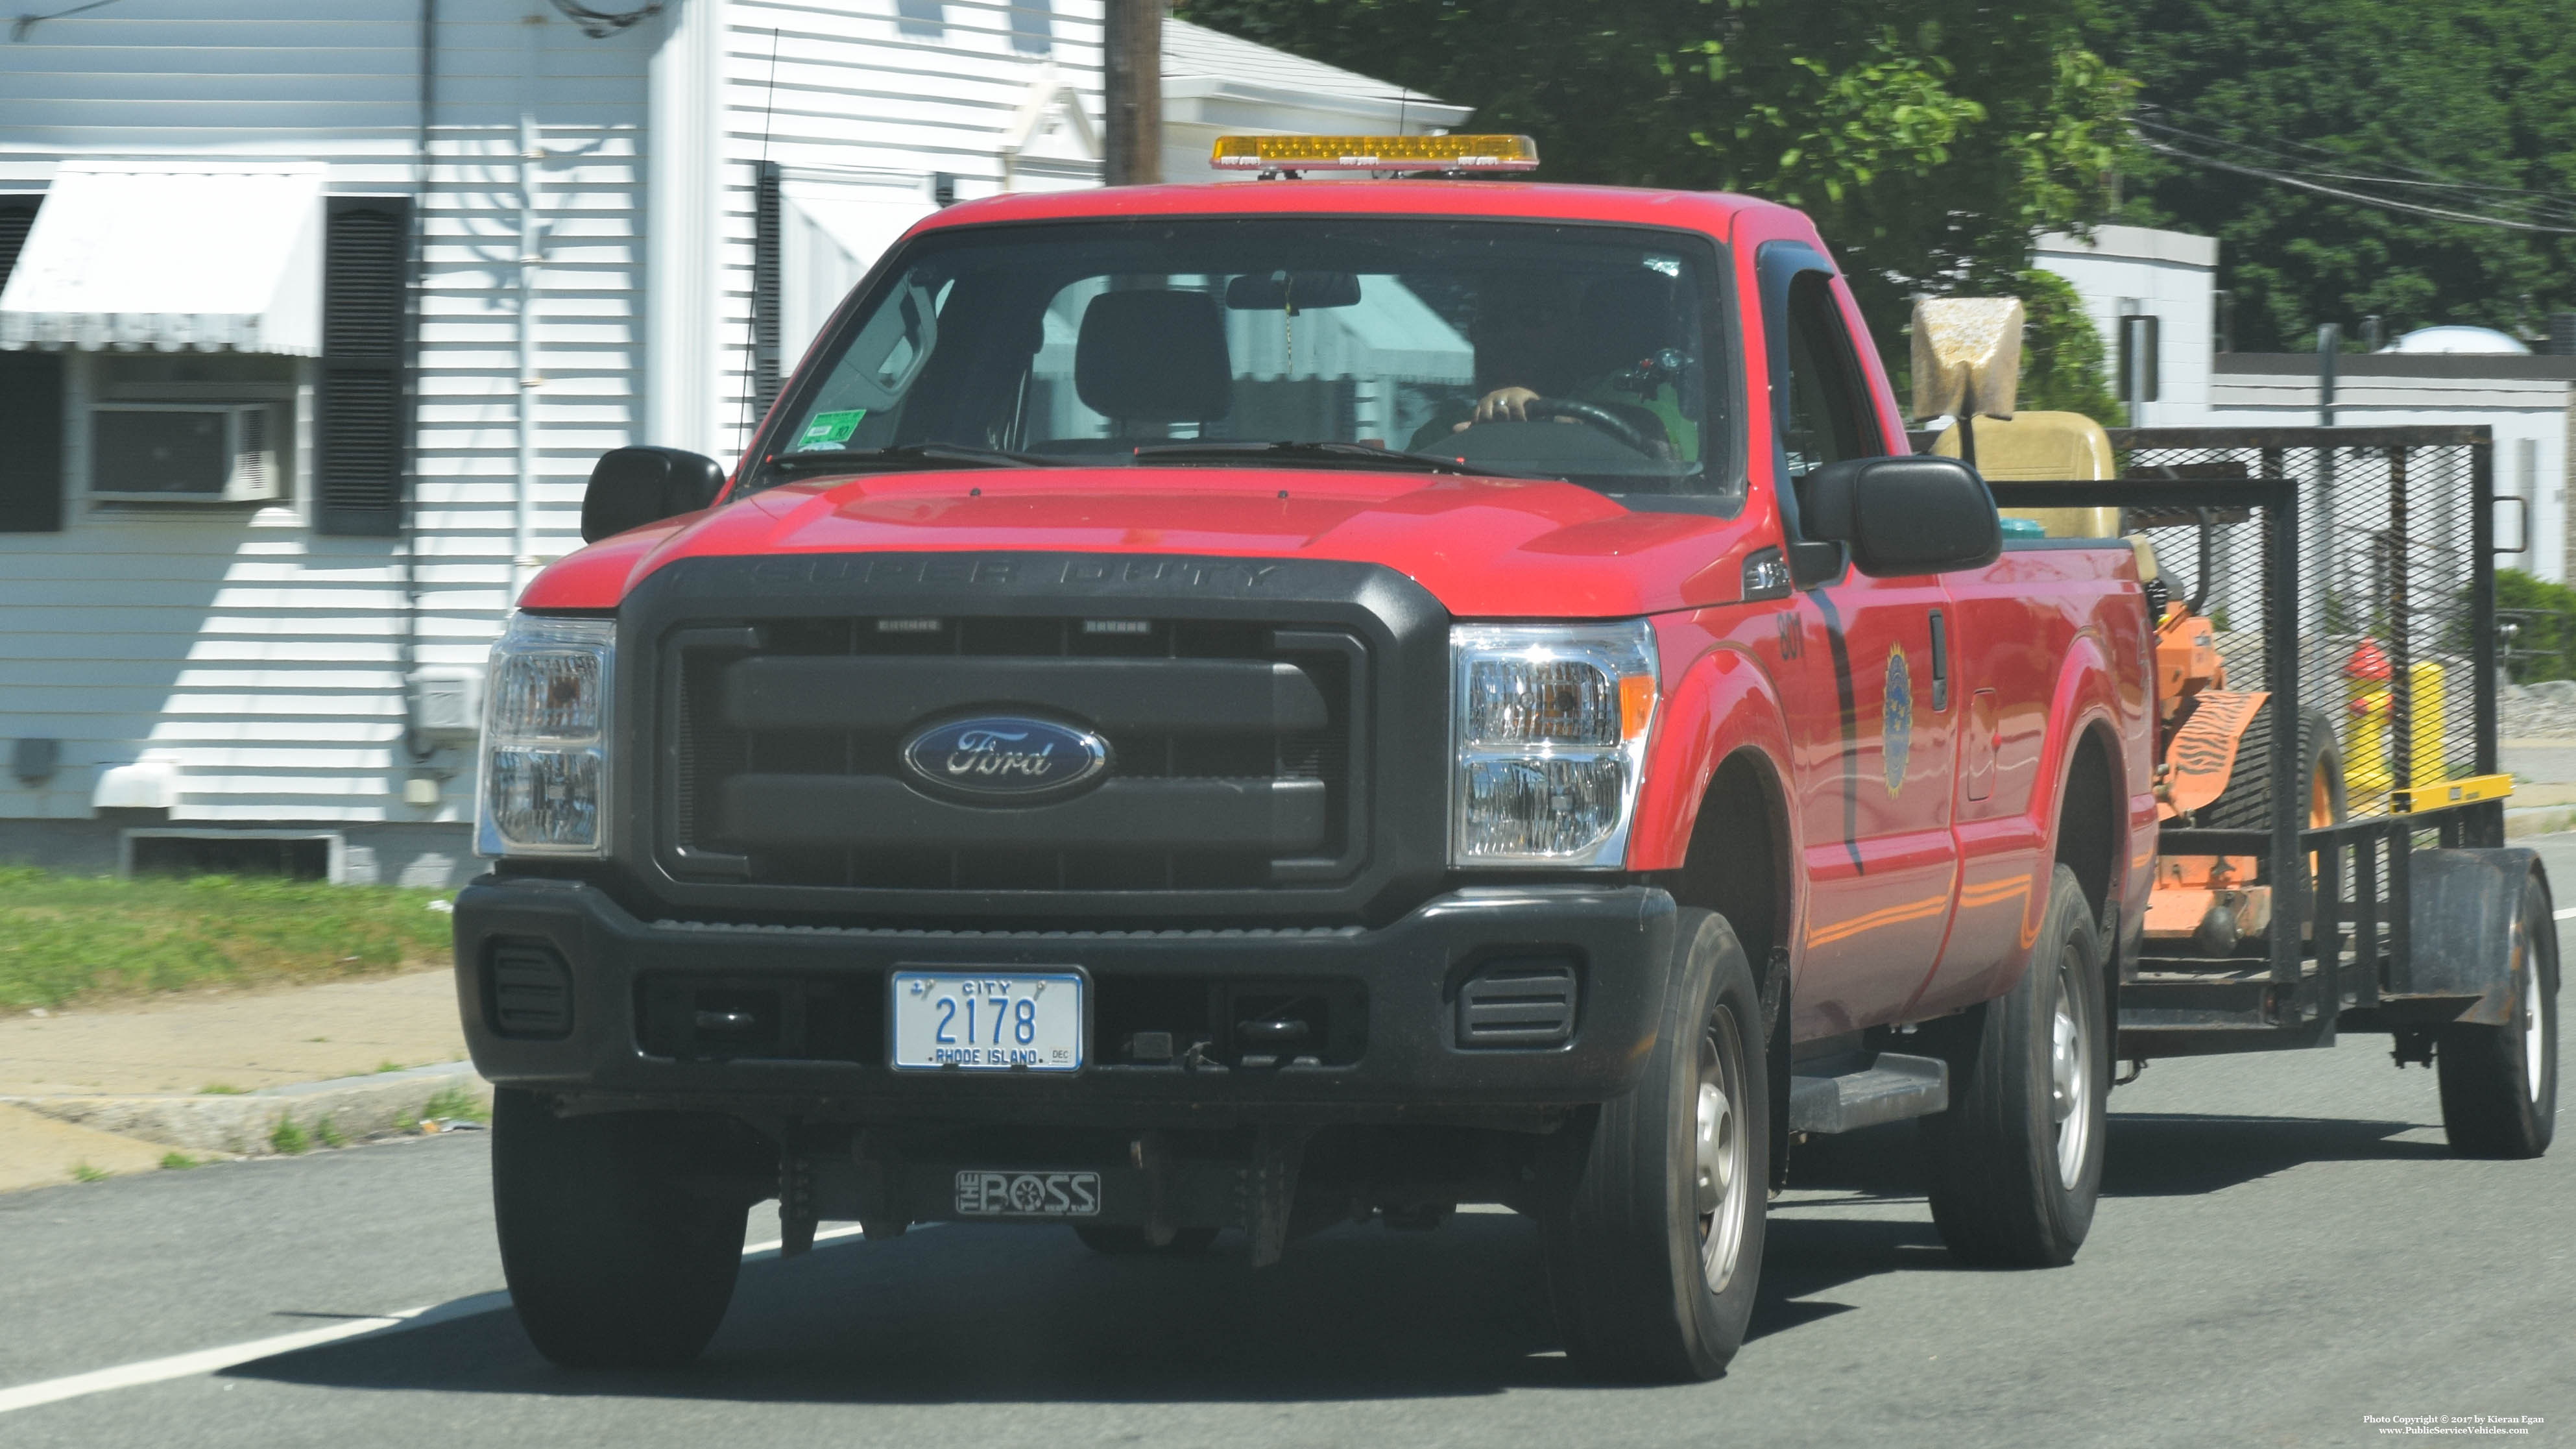 A photo  of East Providence Parks & Recreation Division
            Truck 2178, a 2011-2016 Ford F-250             taken by Kieran Egan